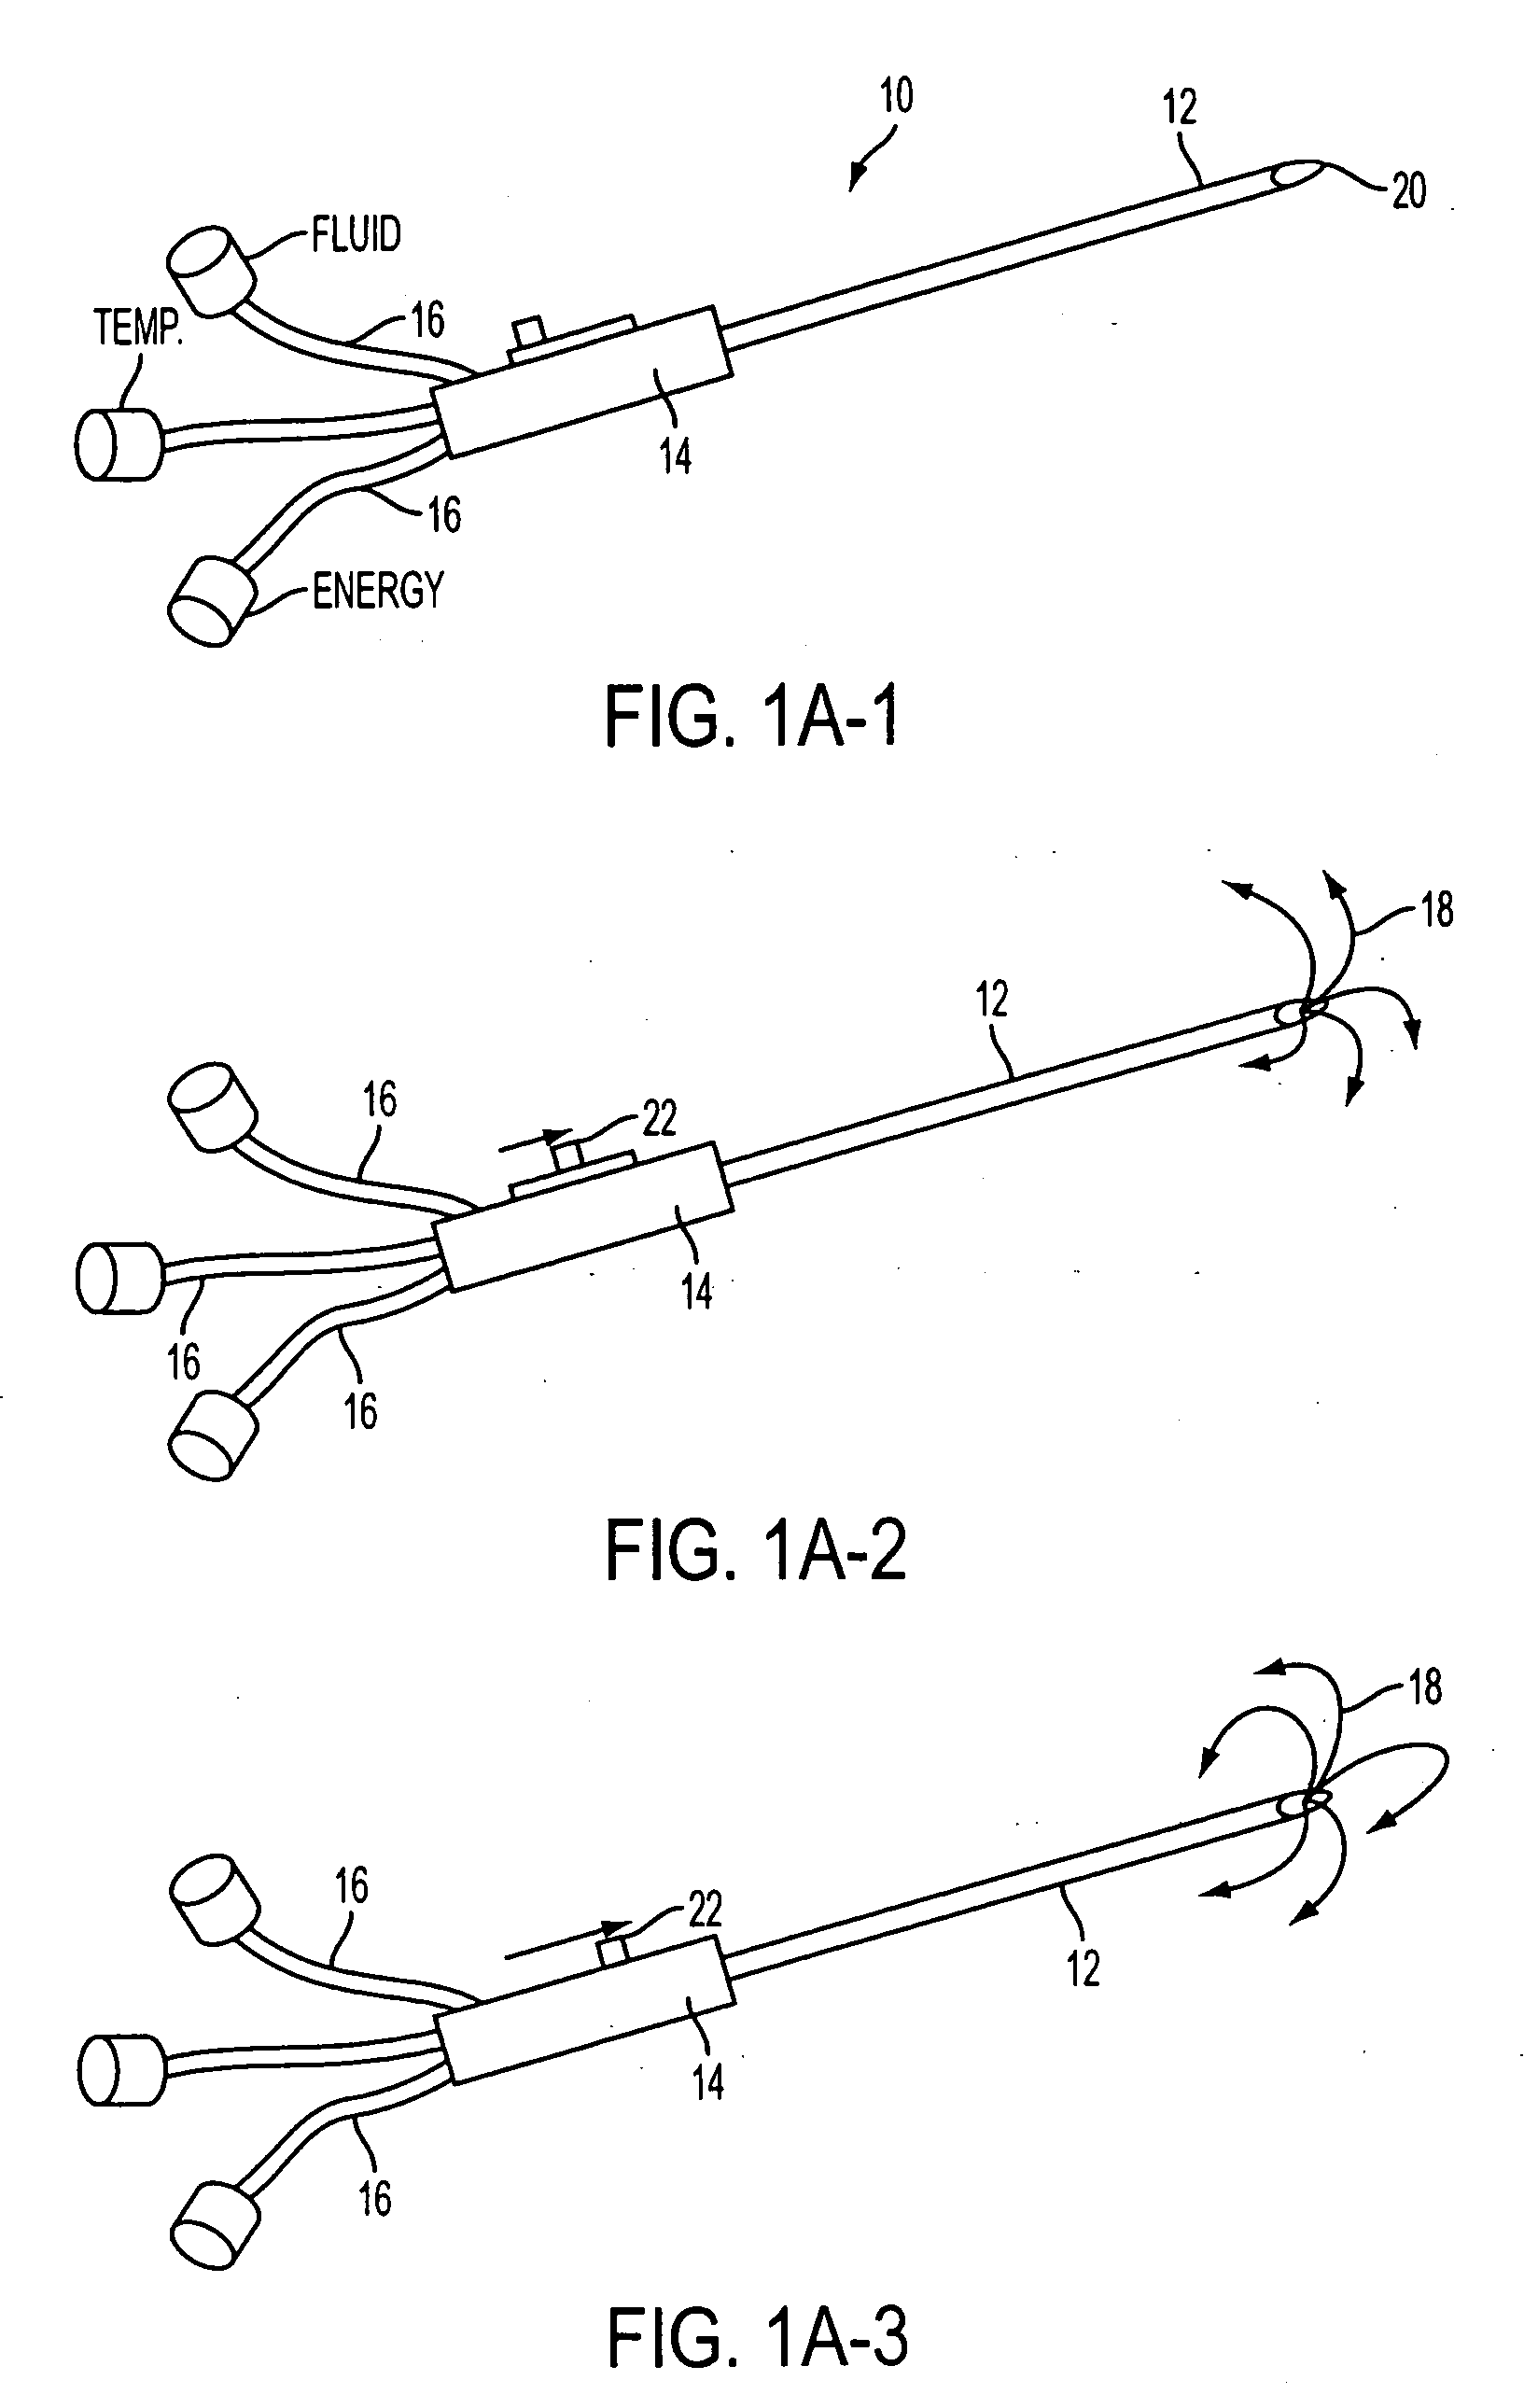 Apparatus and method for pre-conditioning/fixation and treatment of disease with heat activation/release with thermoactivated drugs and gene products